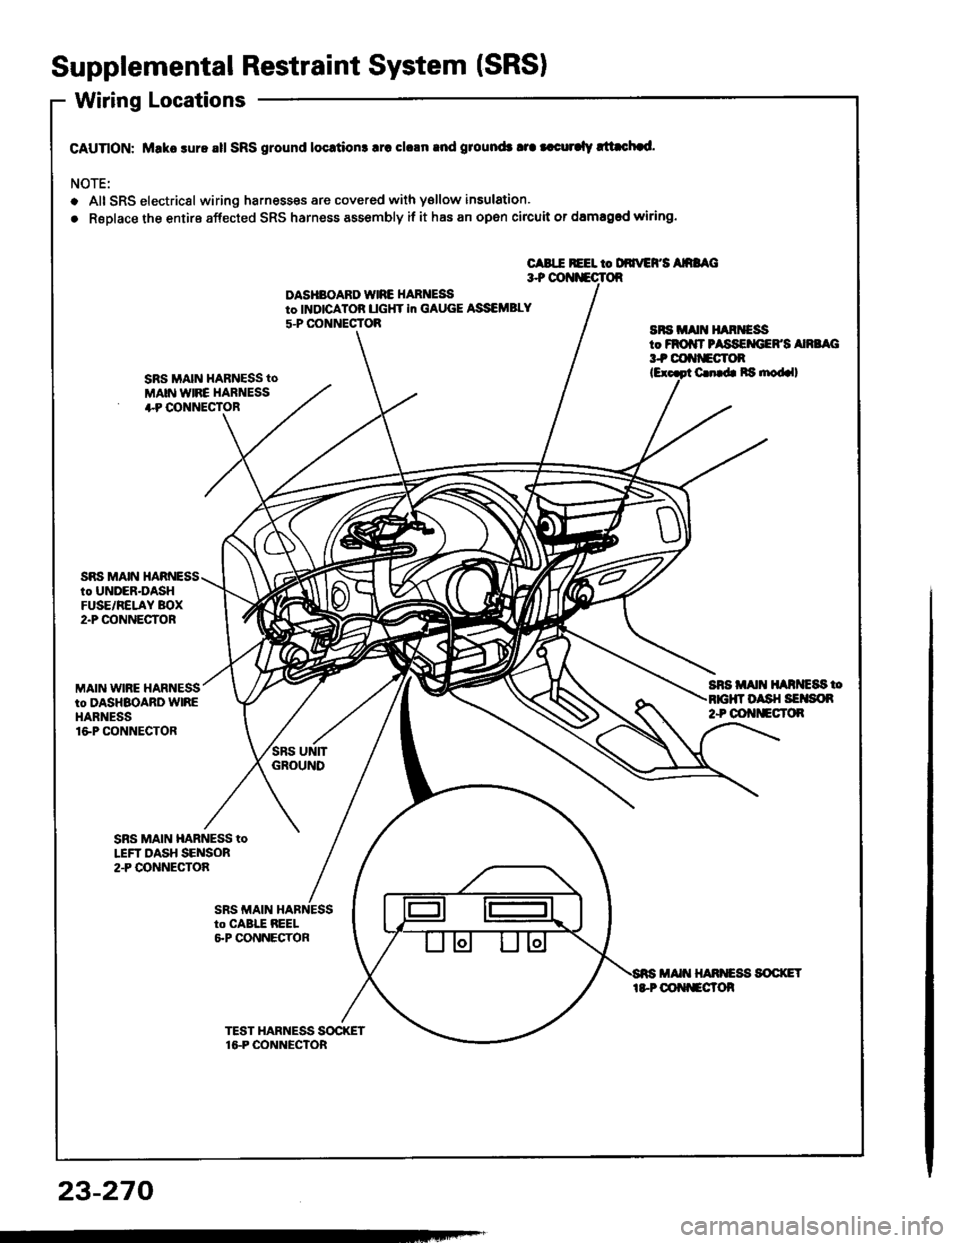 HONDA INTEGRA 1994 4.G Workshop Manual Supplemental Restraint System (SRSI
Wiring Locations
CAUnON: Make sure all SRS ground locrtion3 lrc clrln rnd ground3 tra |.curalv rltachad.
NOTE:
o Alt SRS electricsl wiring harnesses are covered wit